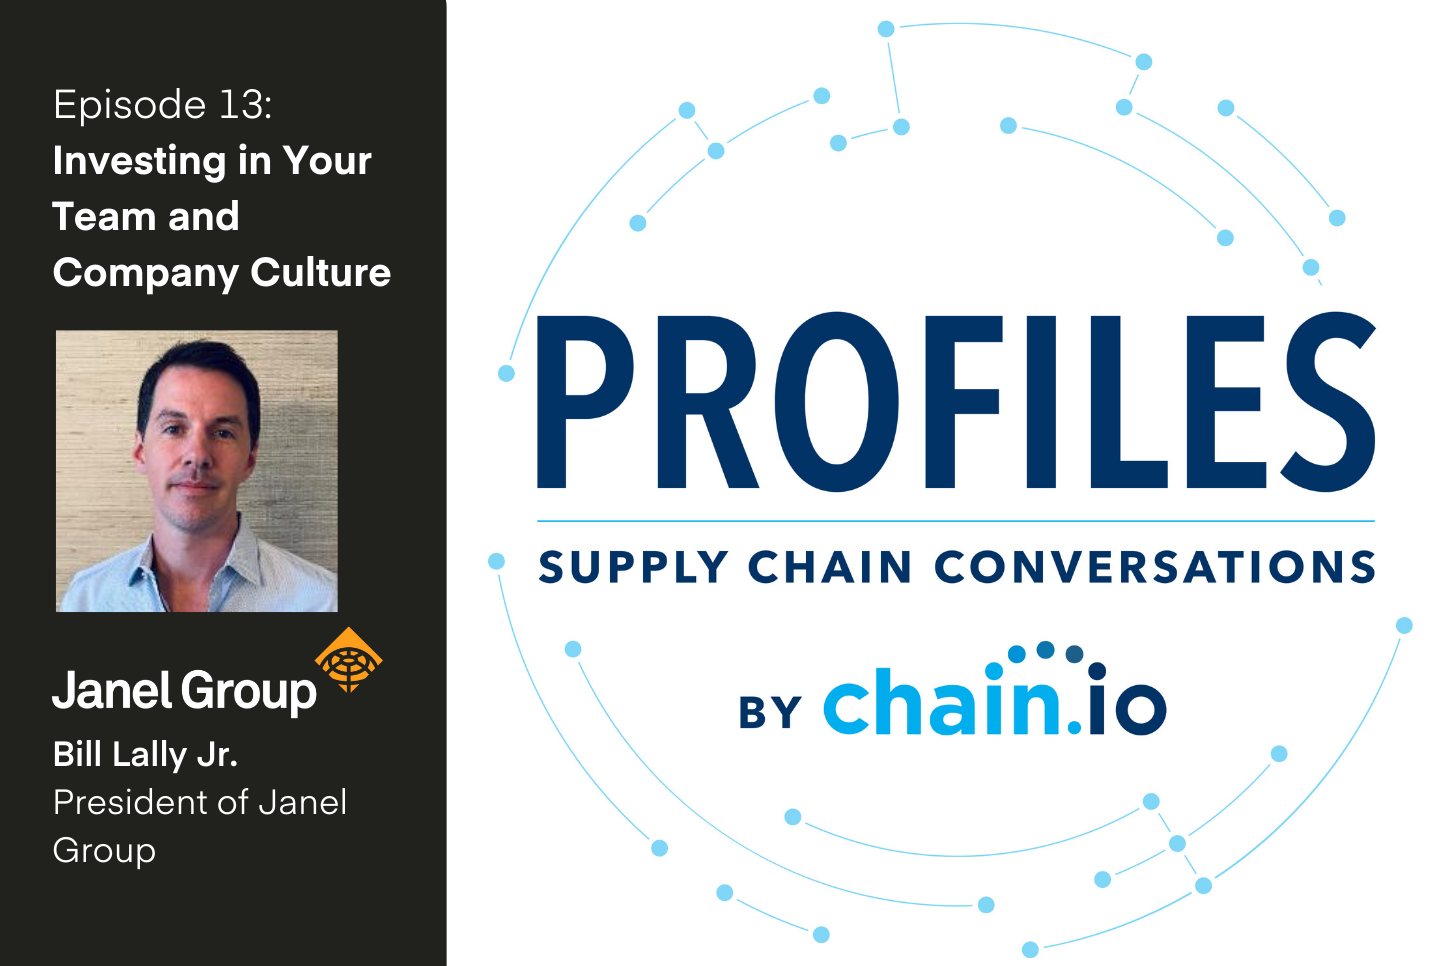 Bill Lally Jr. President of Janel Group joins Chain.io podcast to discuss Janel Group's company culture and supply chain community.